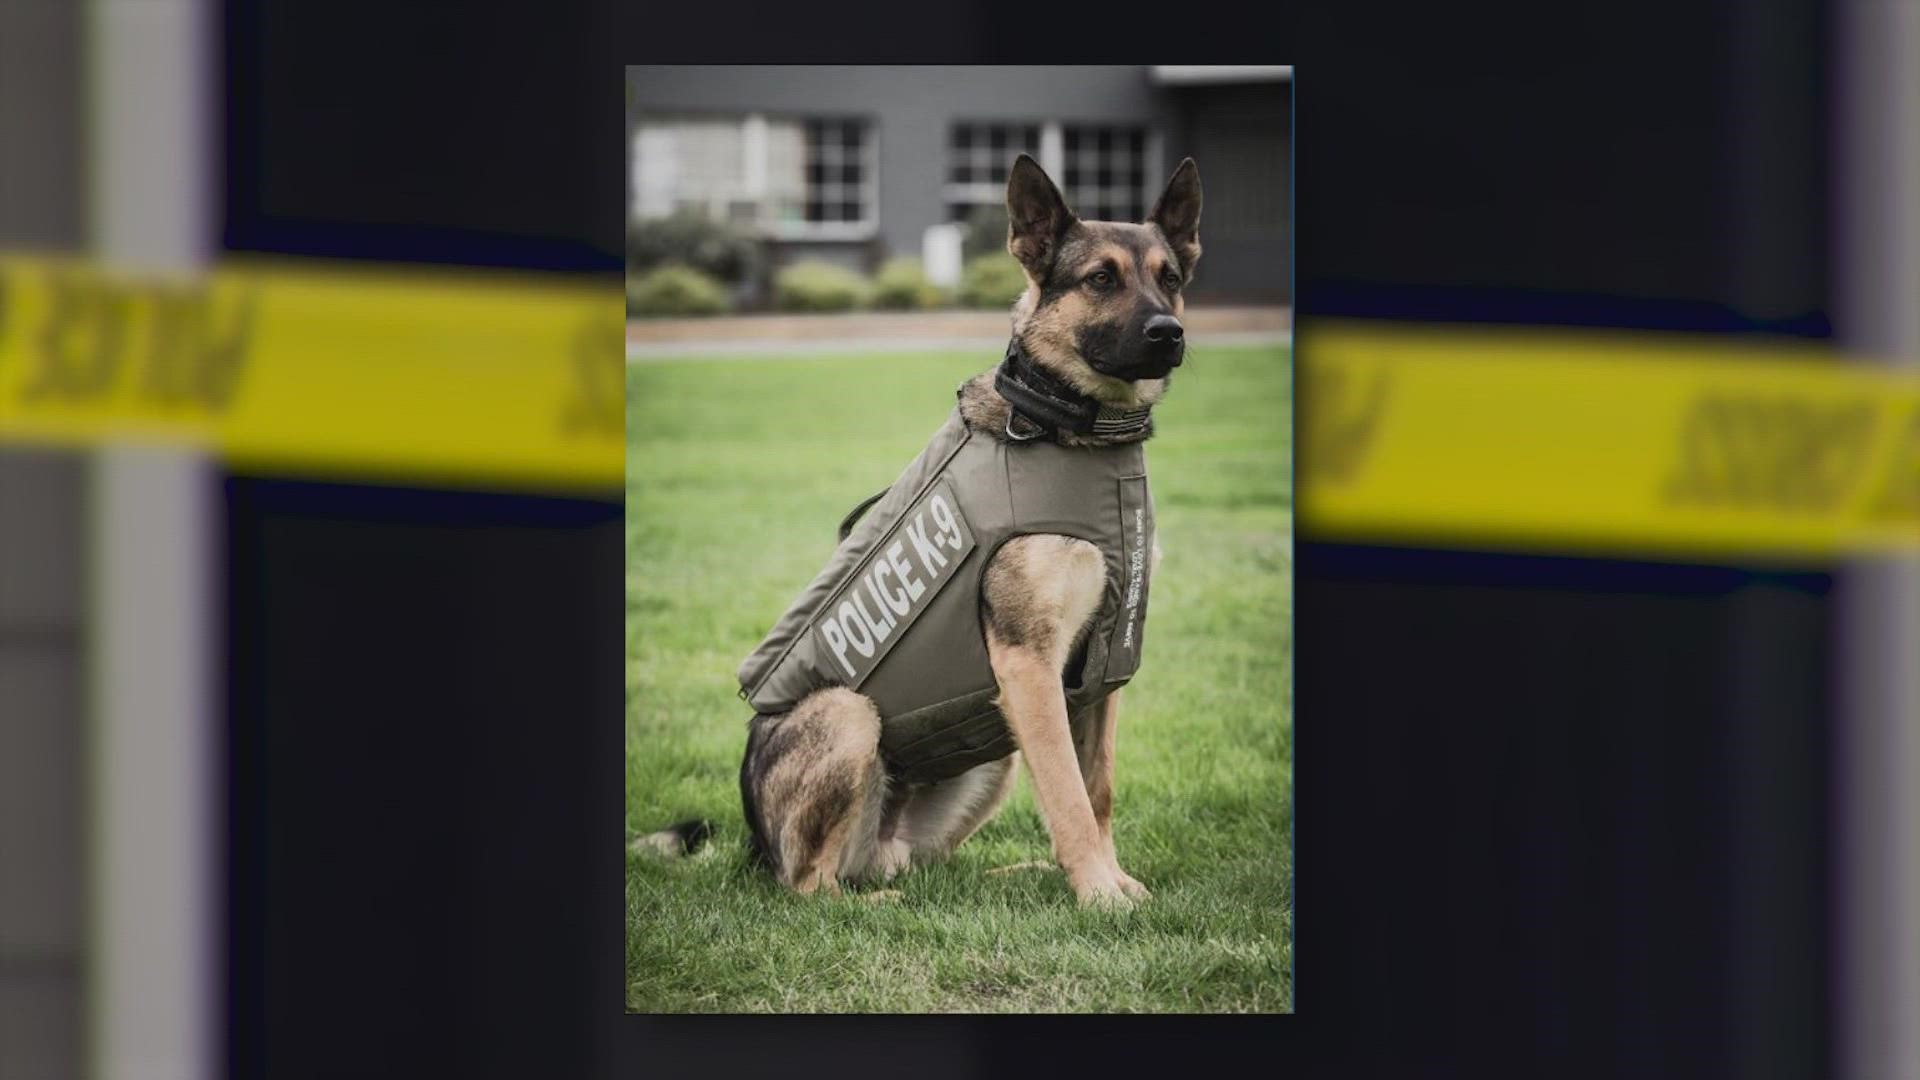 An officer shot and killed the robbery suspect after the suspect killed the police dog and stabbed another Seattle police officer in the face.